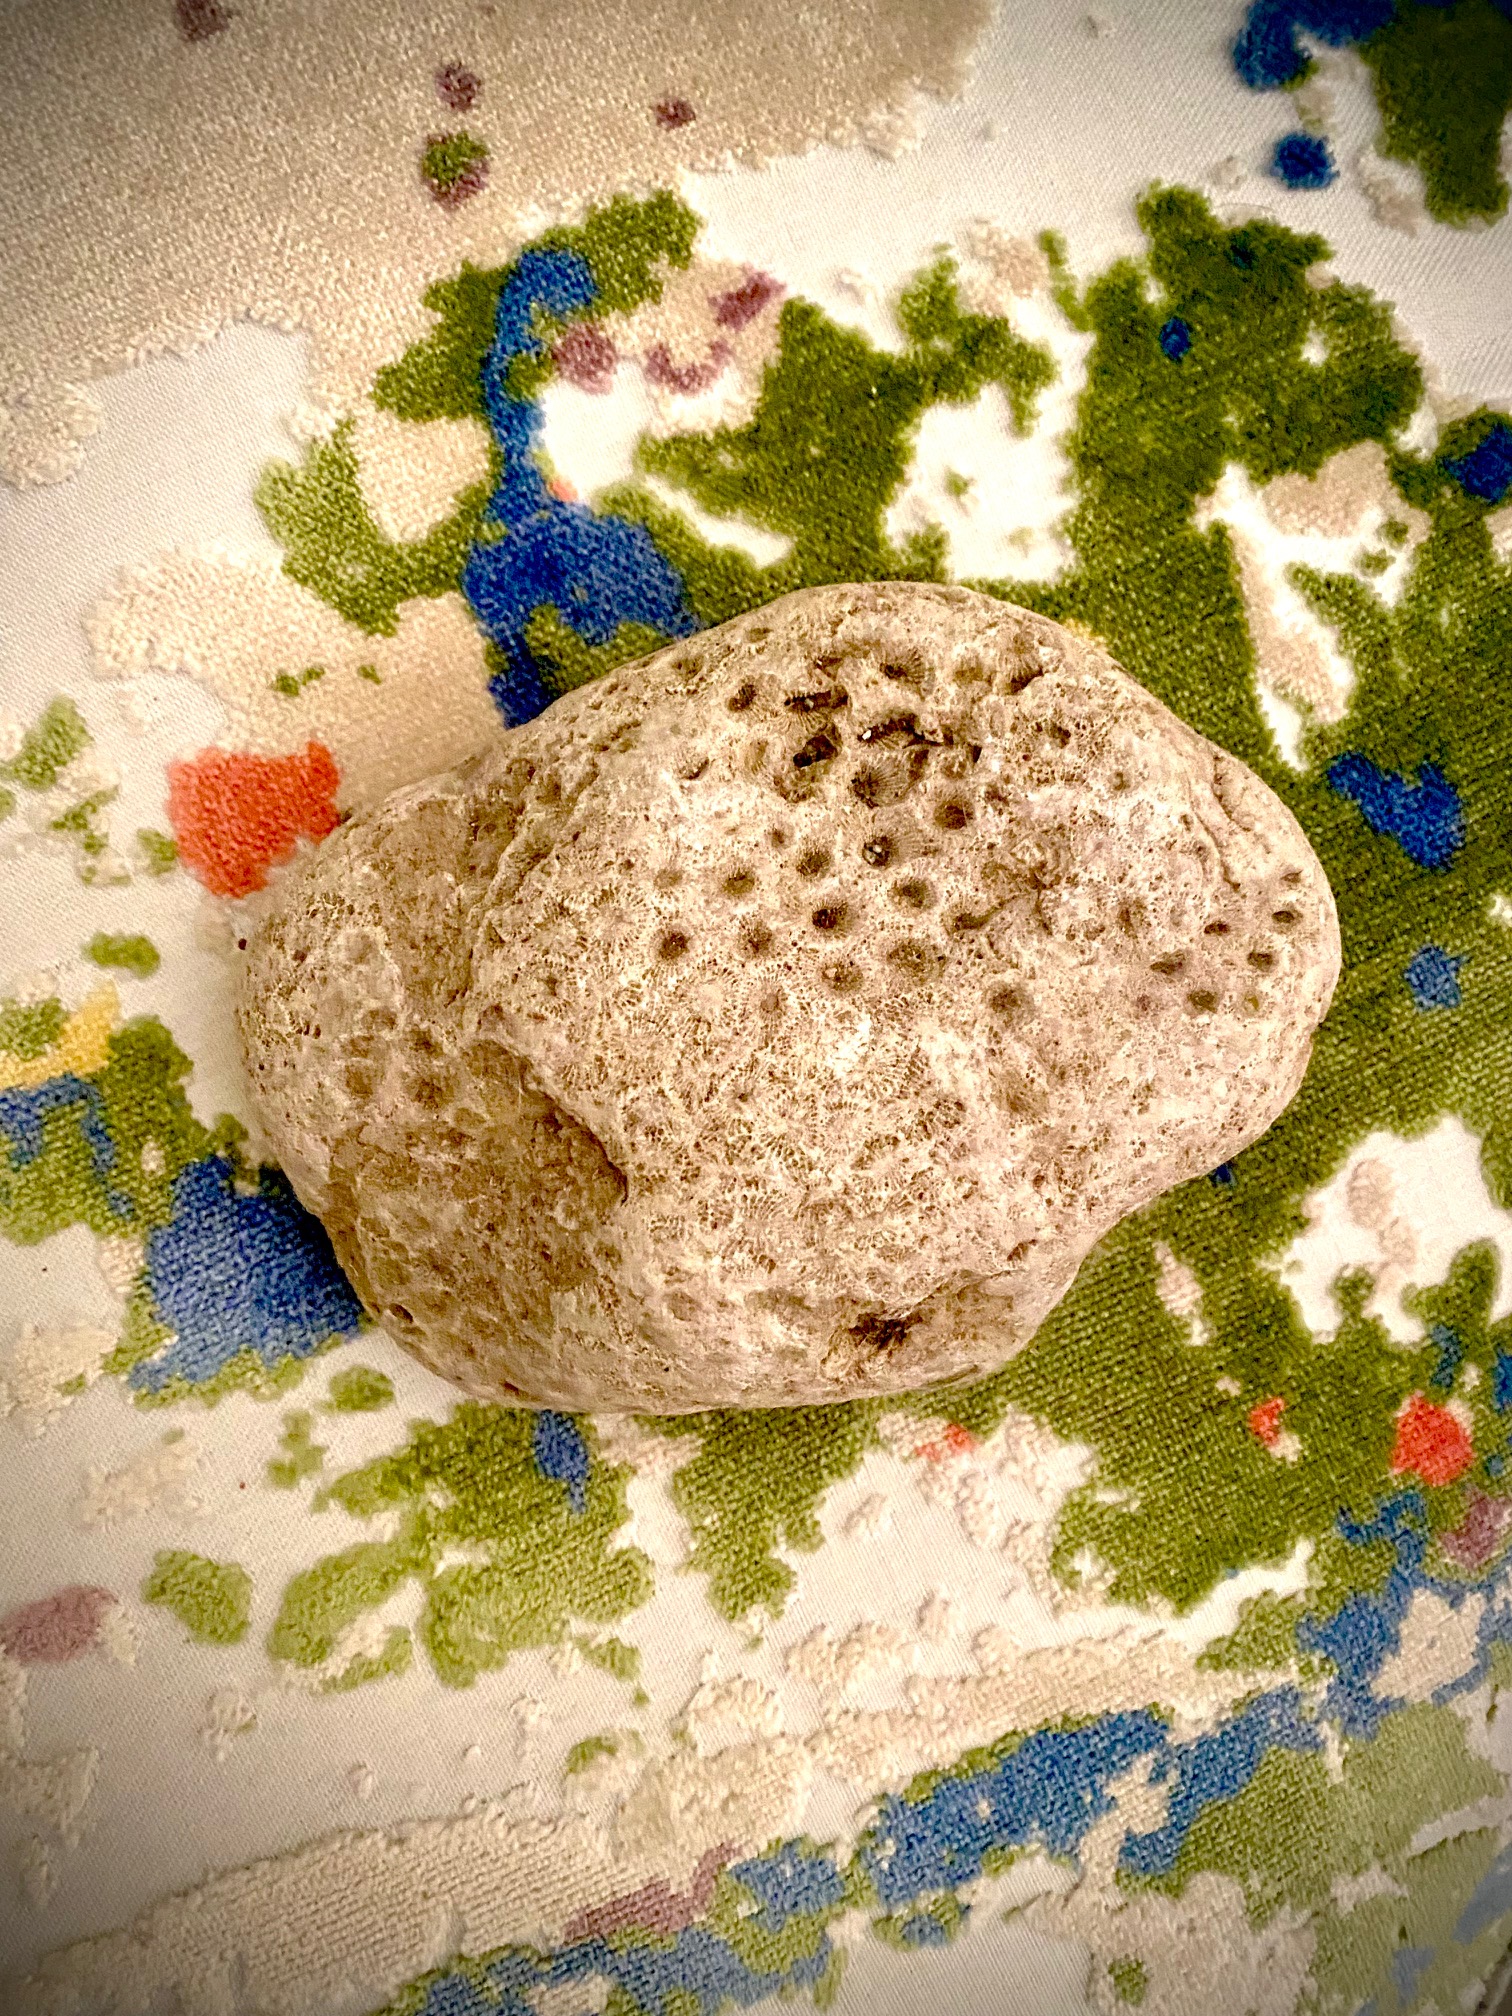 Photo of a large off-white stone on a colorful towel.